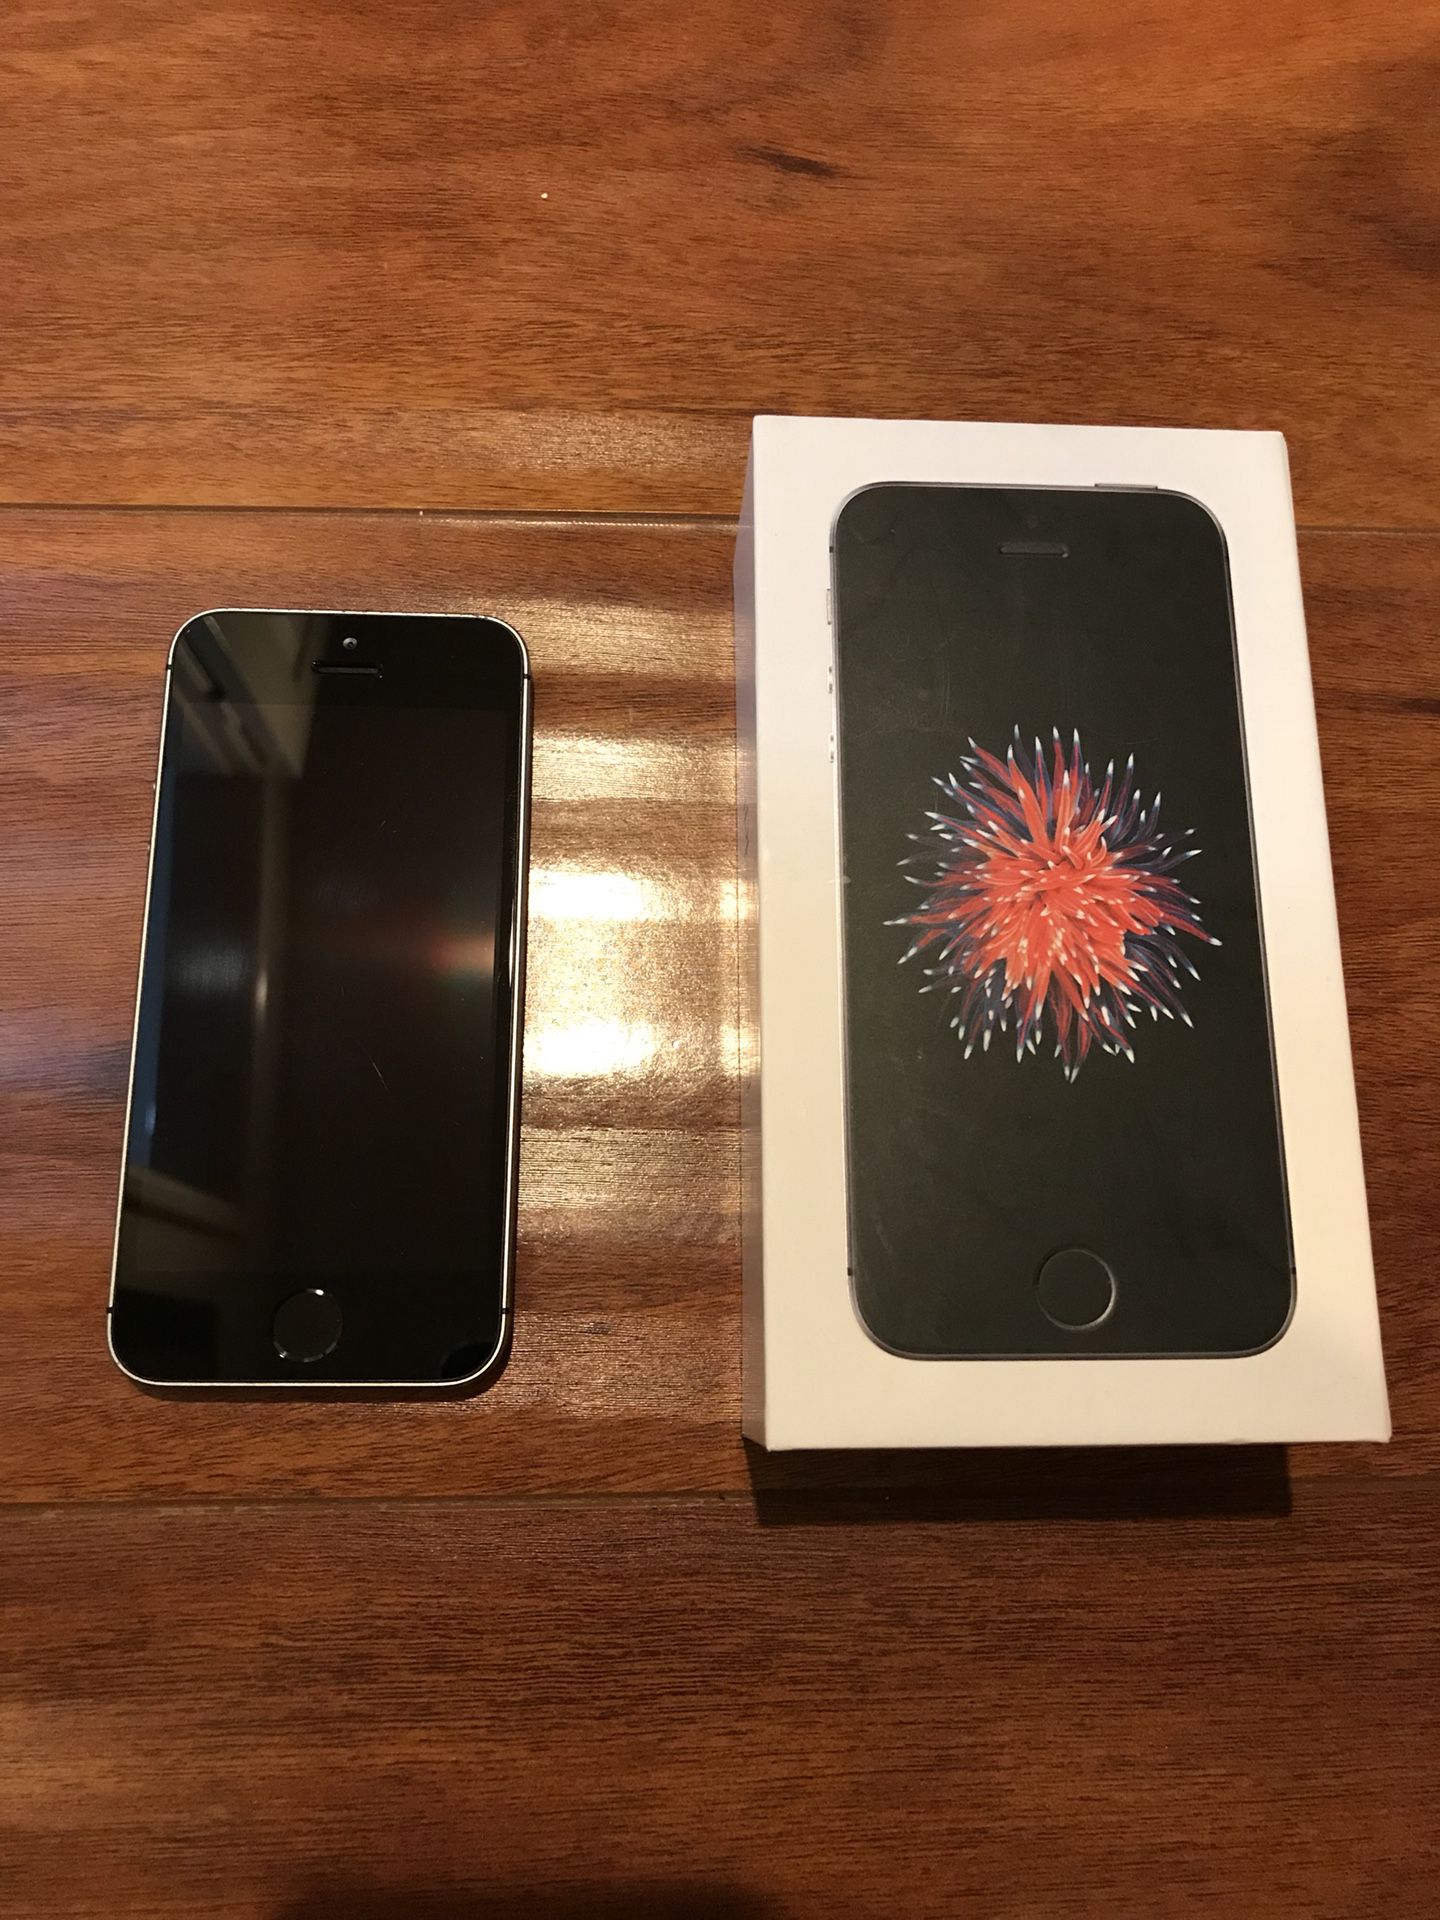 Apple iPhone 5 SE for sprint 2 months old